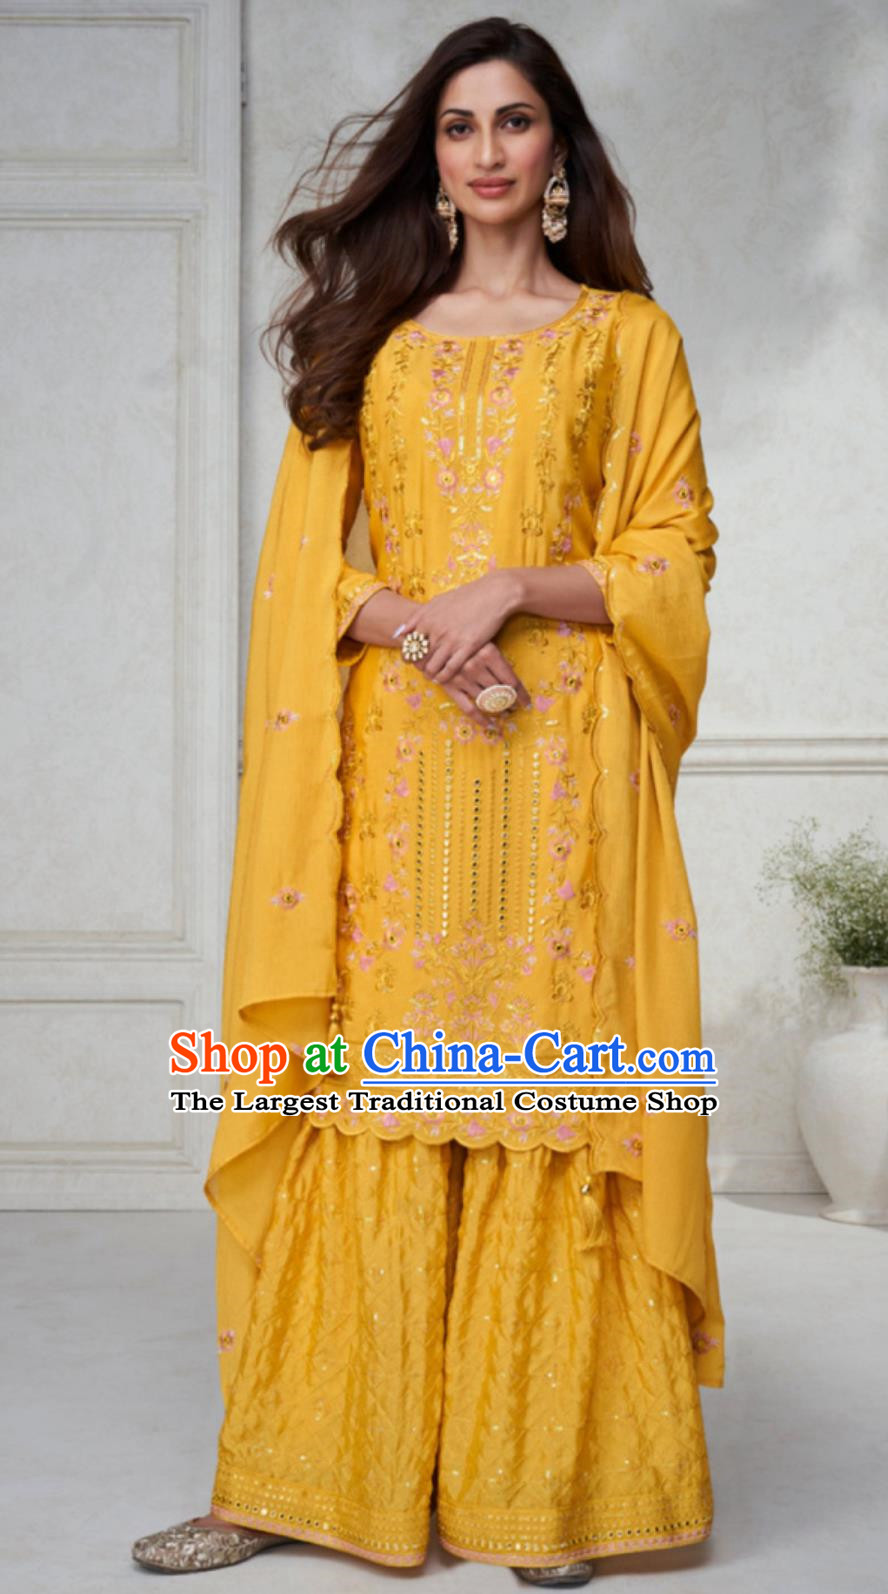 Yellow Indian Parajabi Three Piece National Embroidered Traditional Women Clothes